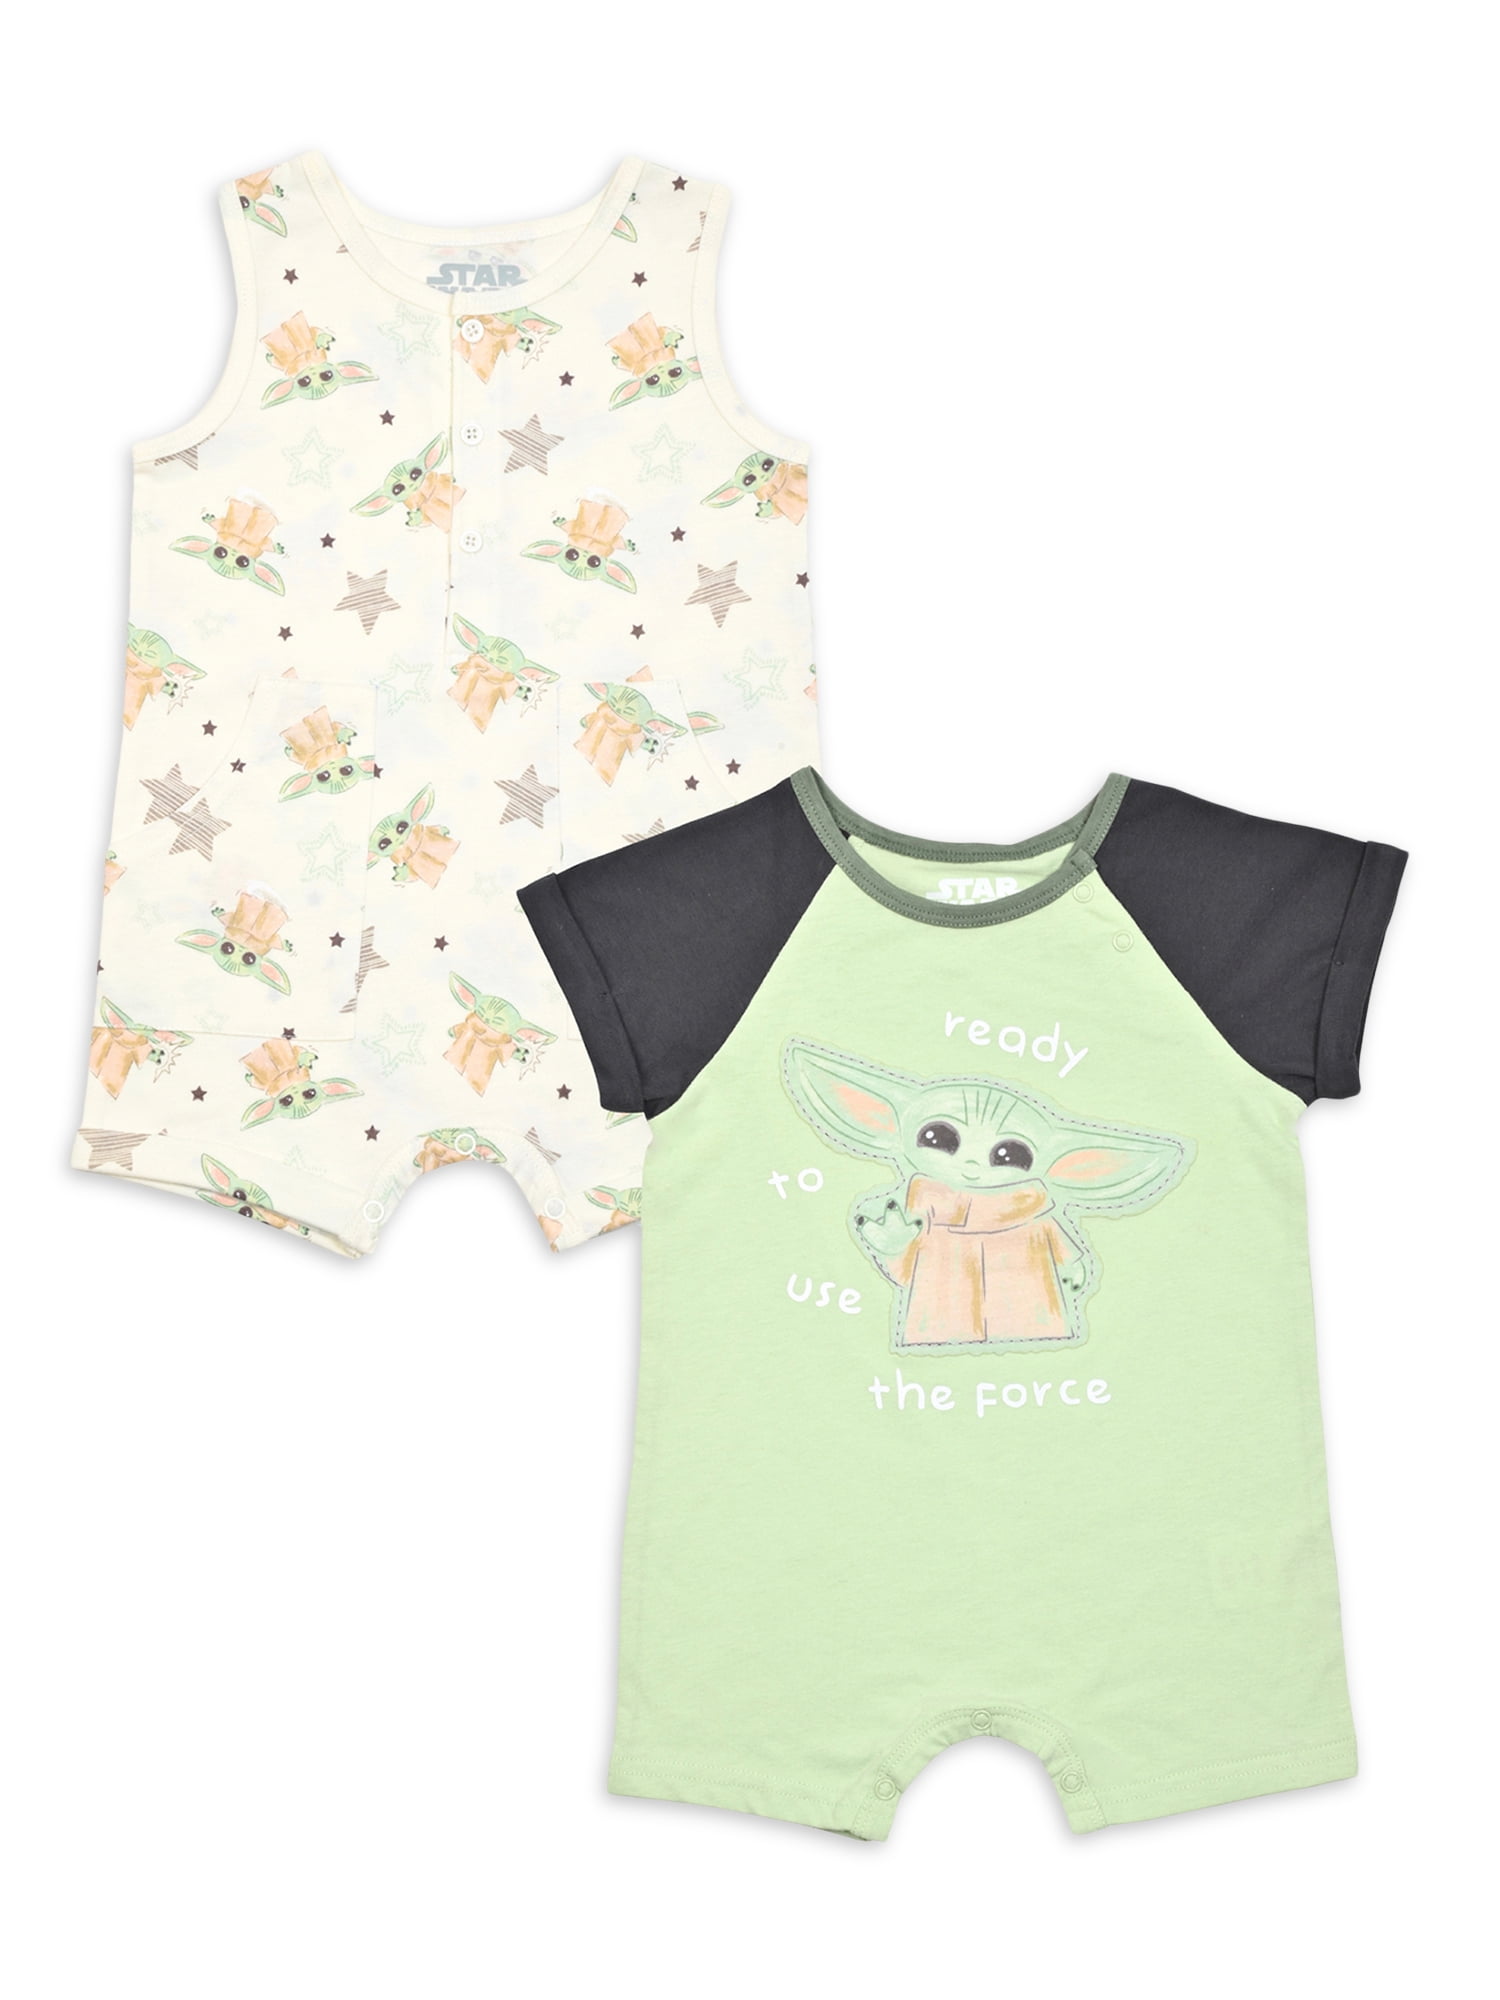 Mothercare Baby boys cute top by Mothercare age 3-6 months 